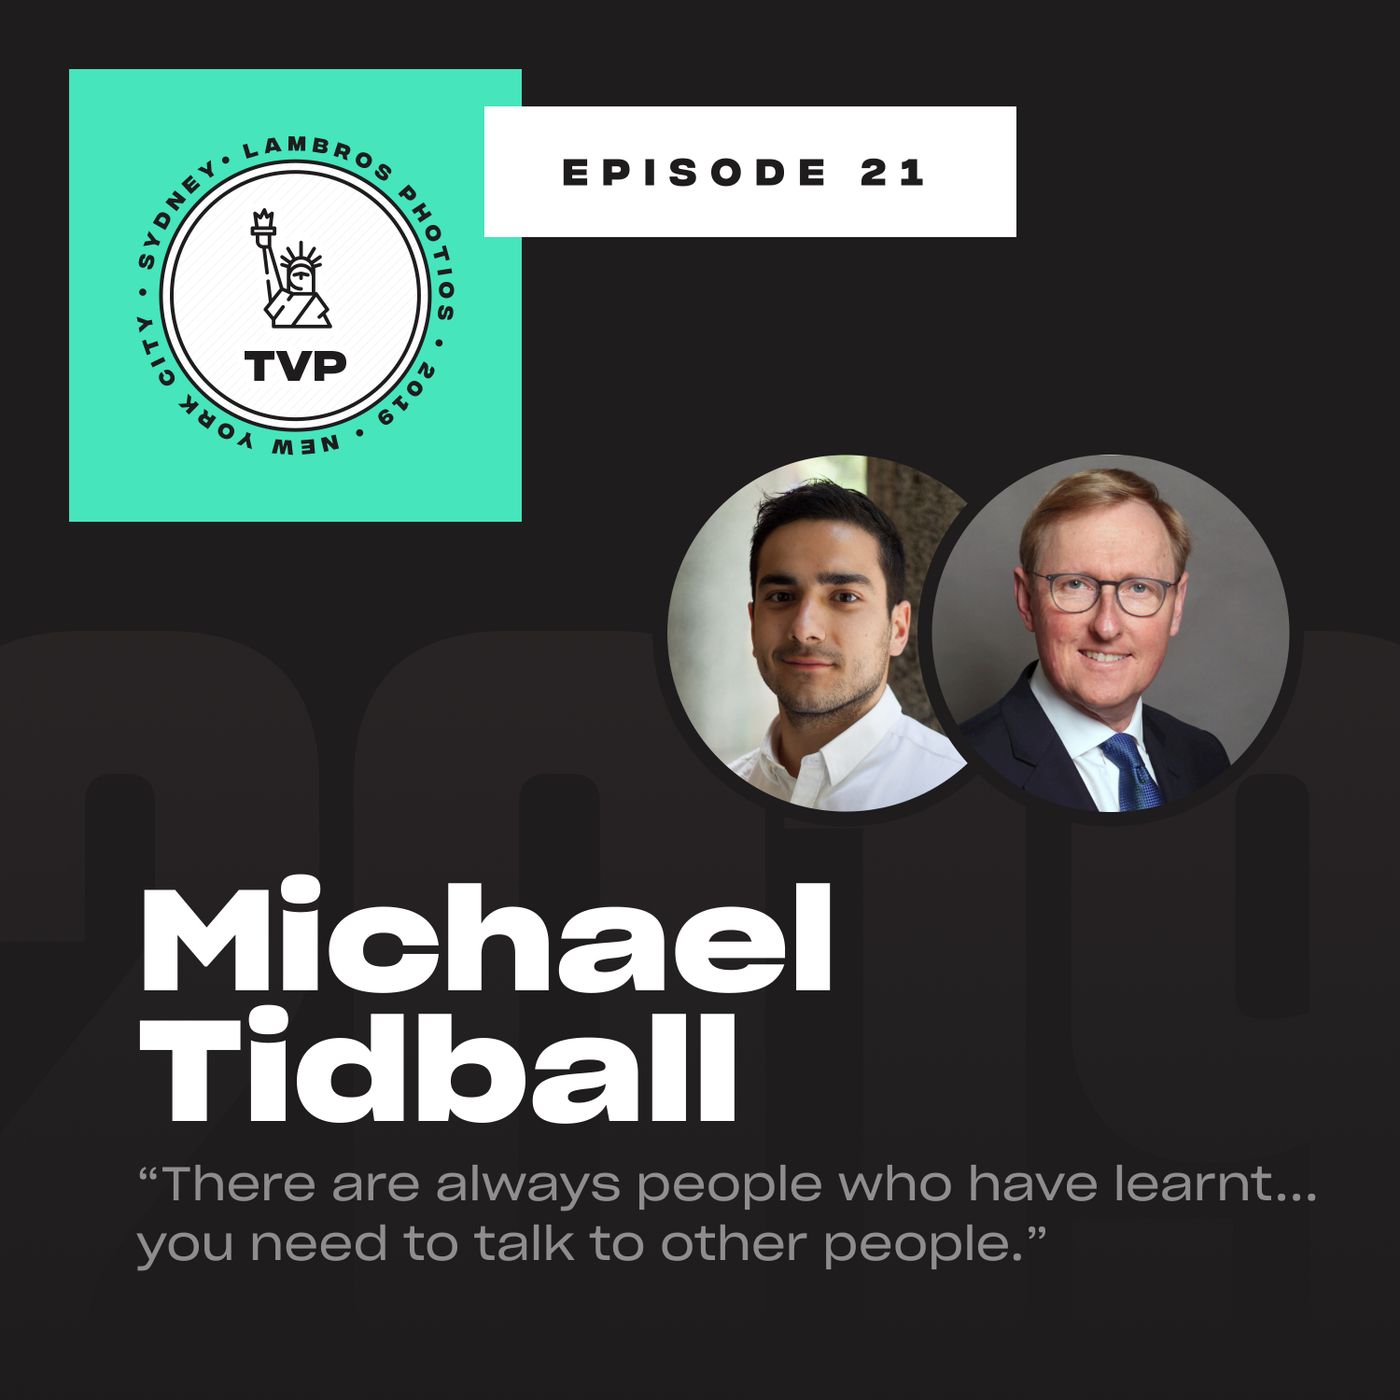 How to Get Your Legal Framework Right with Michael Tidball